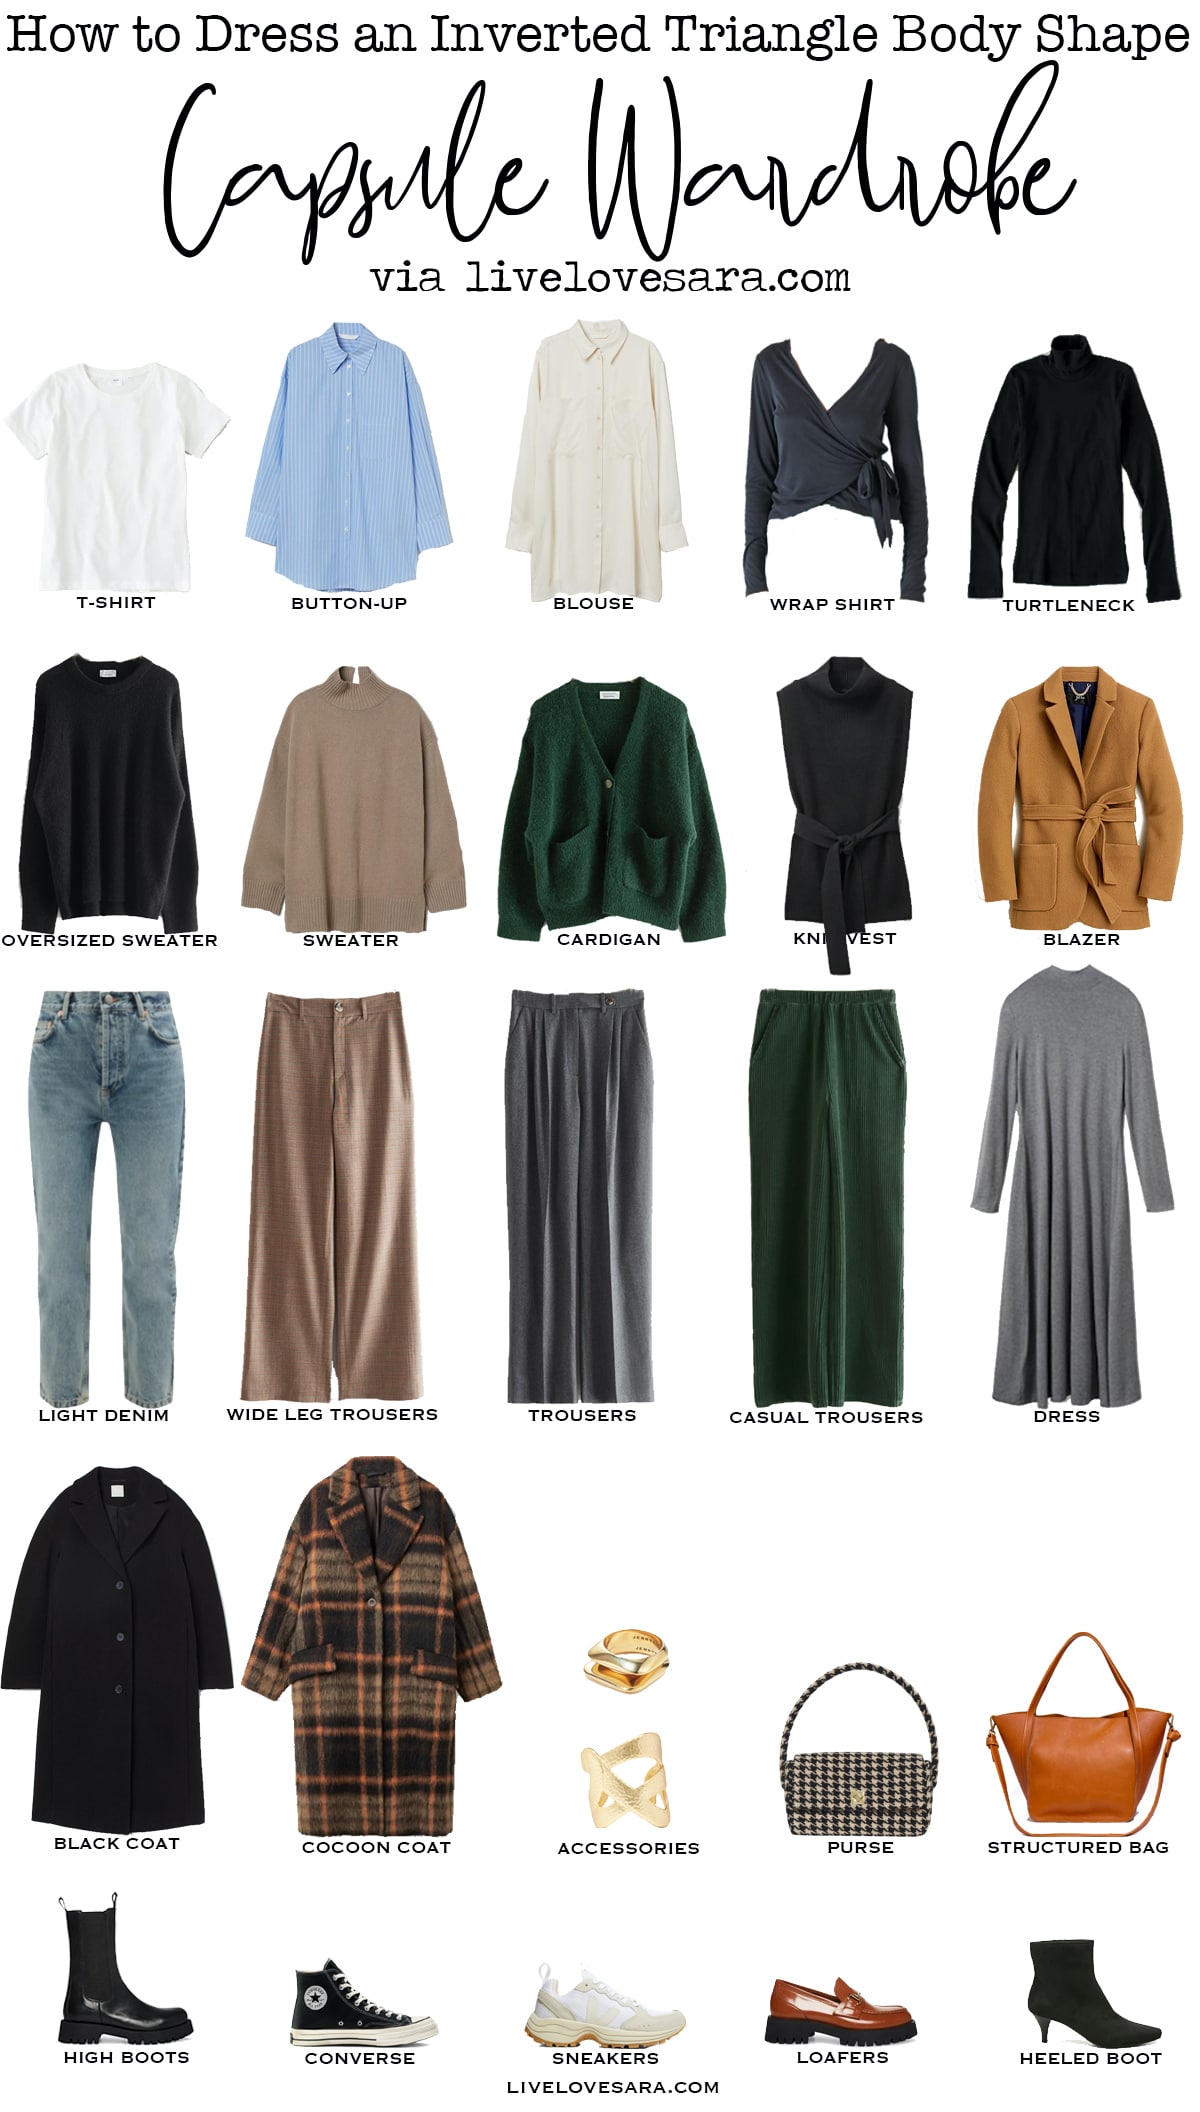 How to Style an Inverted Triangle Body Shape Capsule Wardrobe